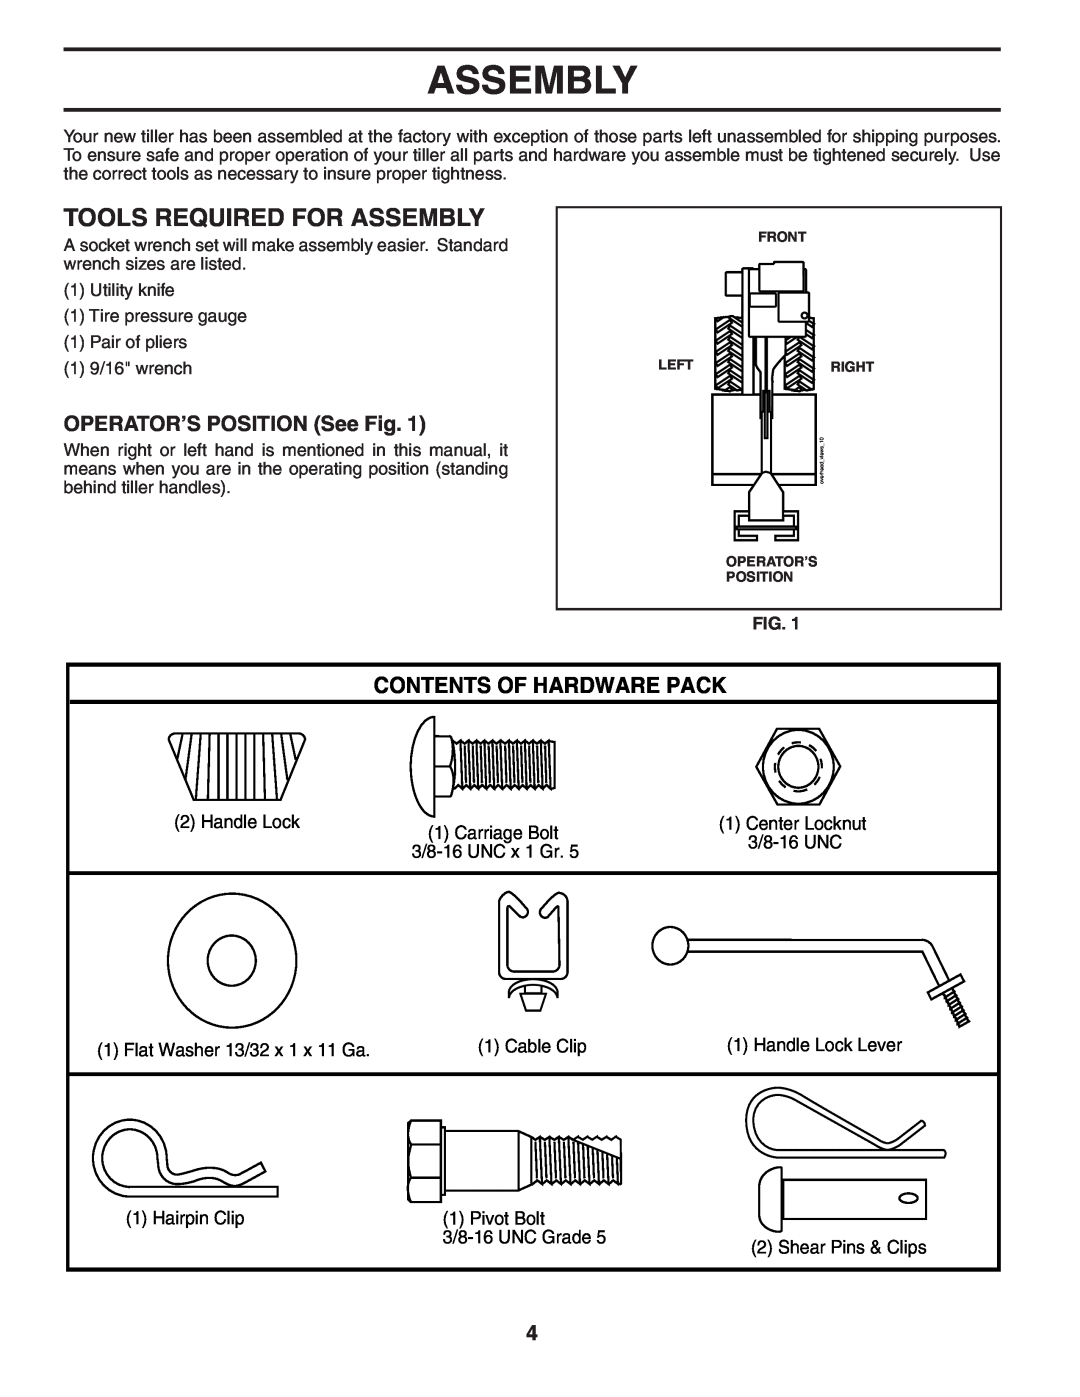 Poulan 403701 Tools Required For Assembly, Contents Of Hardware Pack, OPERATOR’S POSITION See Fig, Handle Lock 